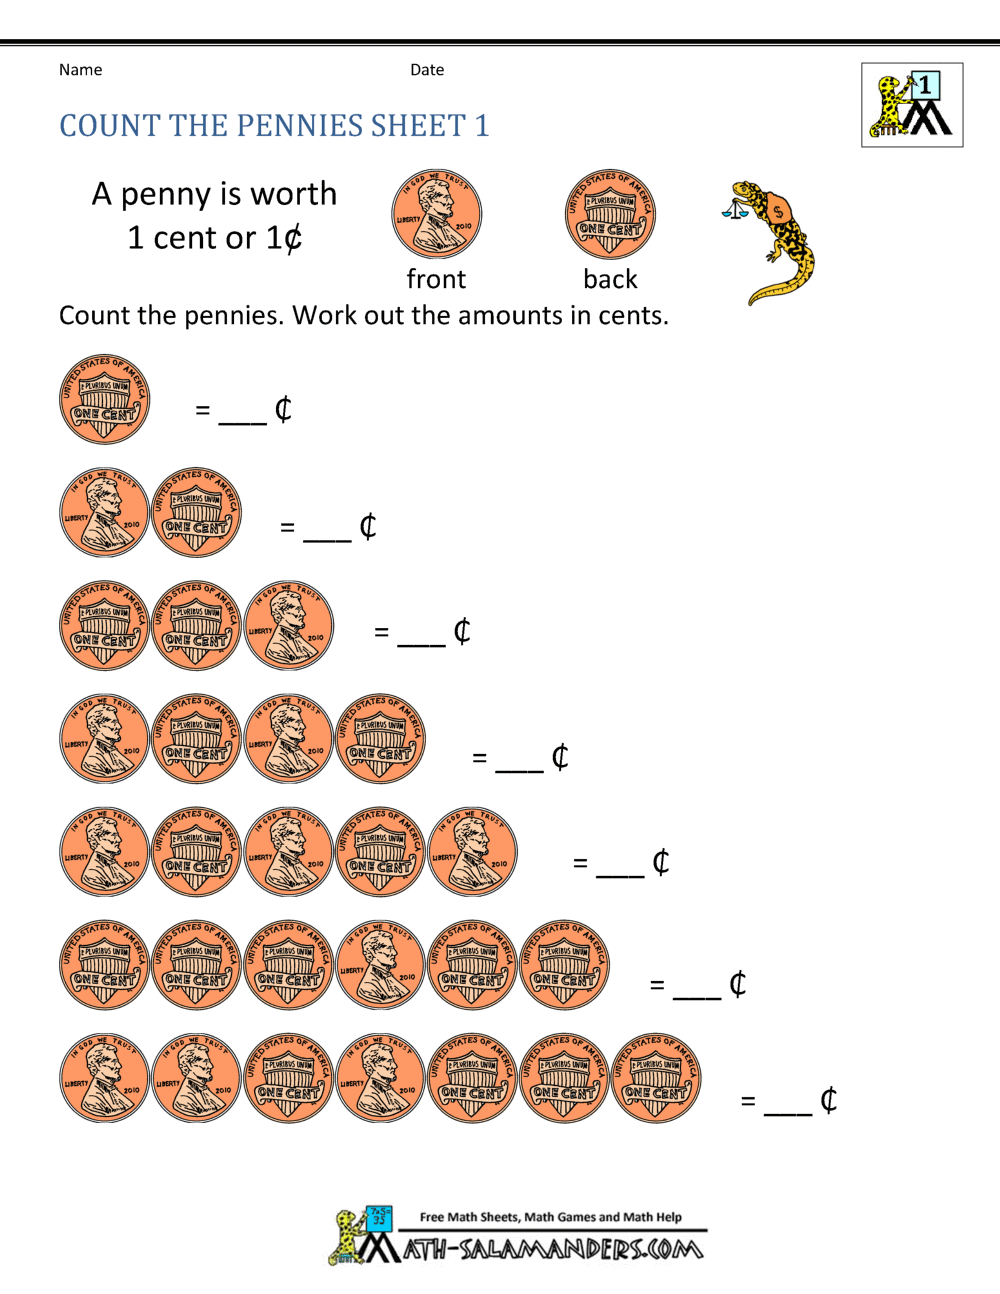 download-count-the-pennies-money-worksheets-for-kids-template-for-free